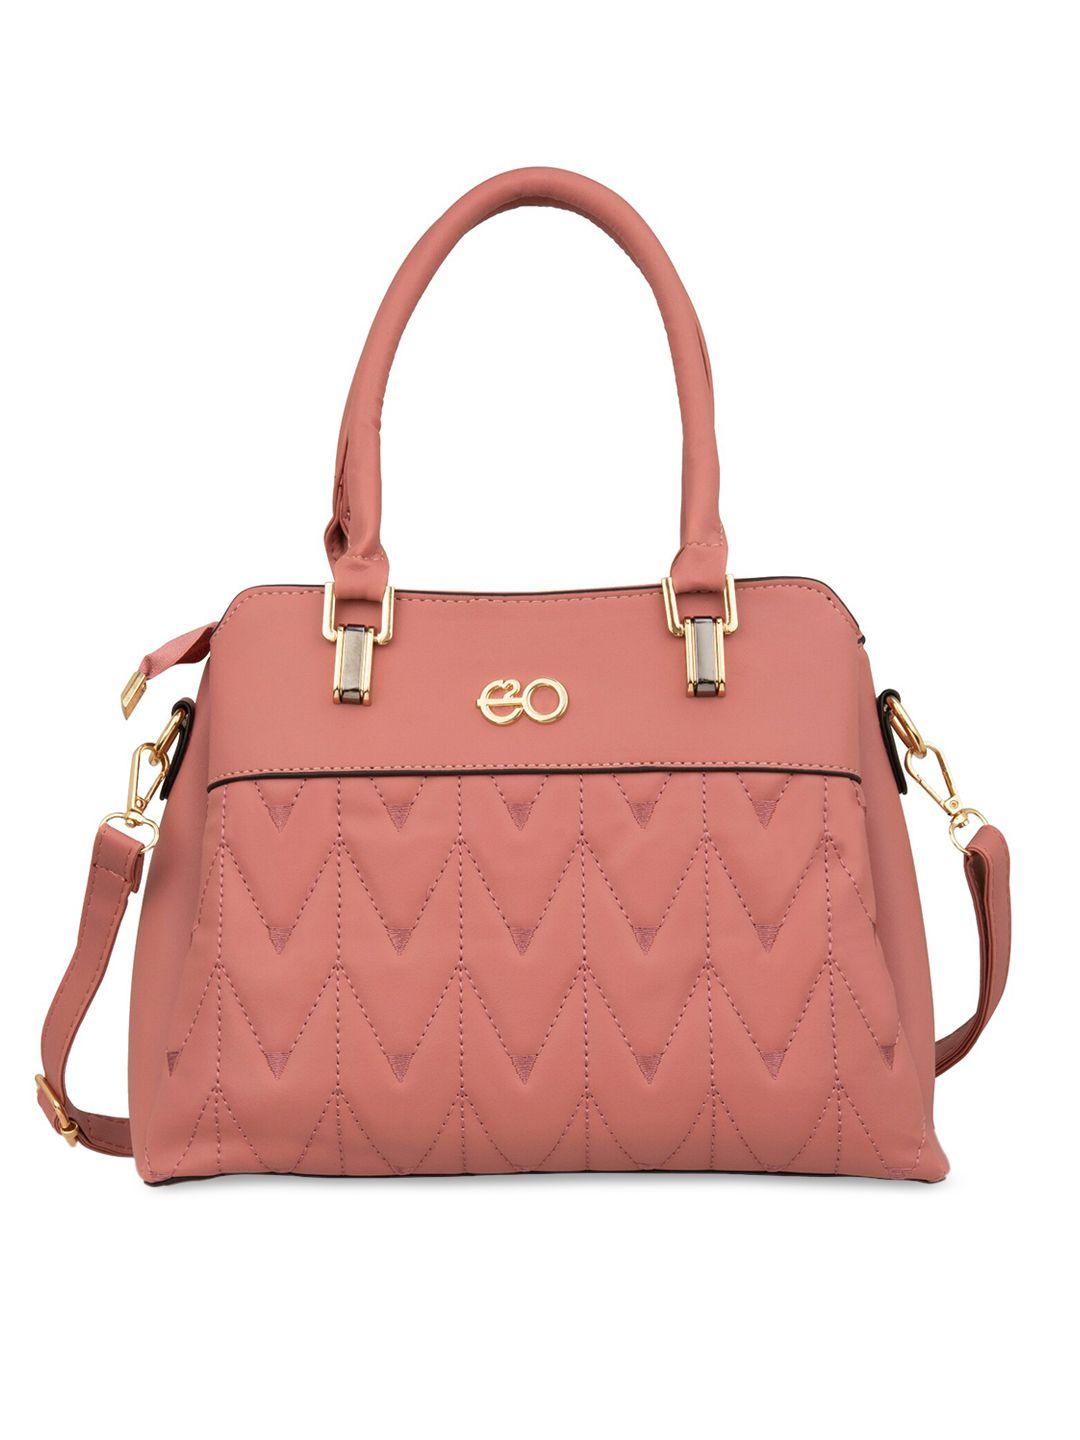 e2o pink pu structured handheld bag with quilted